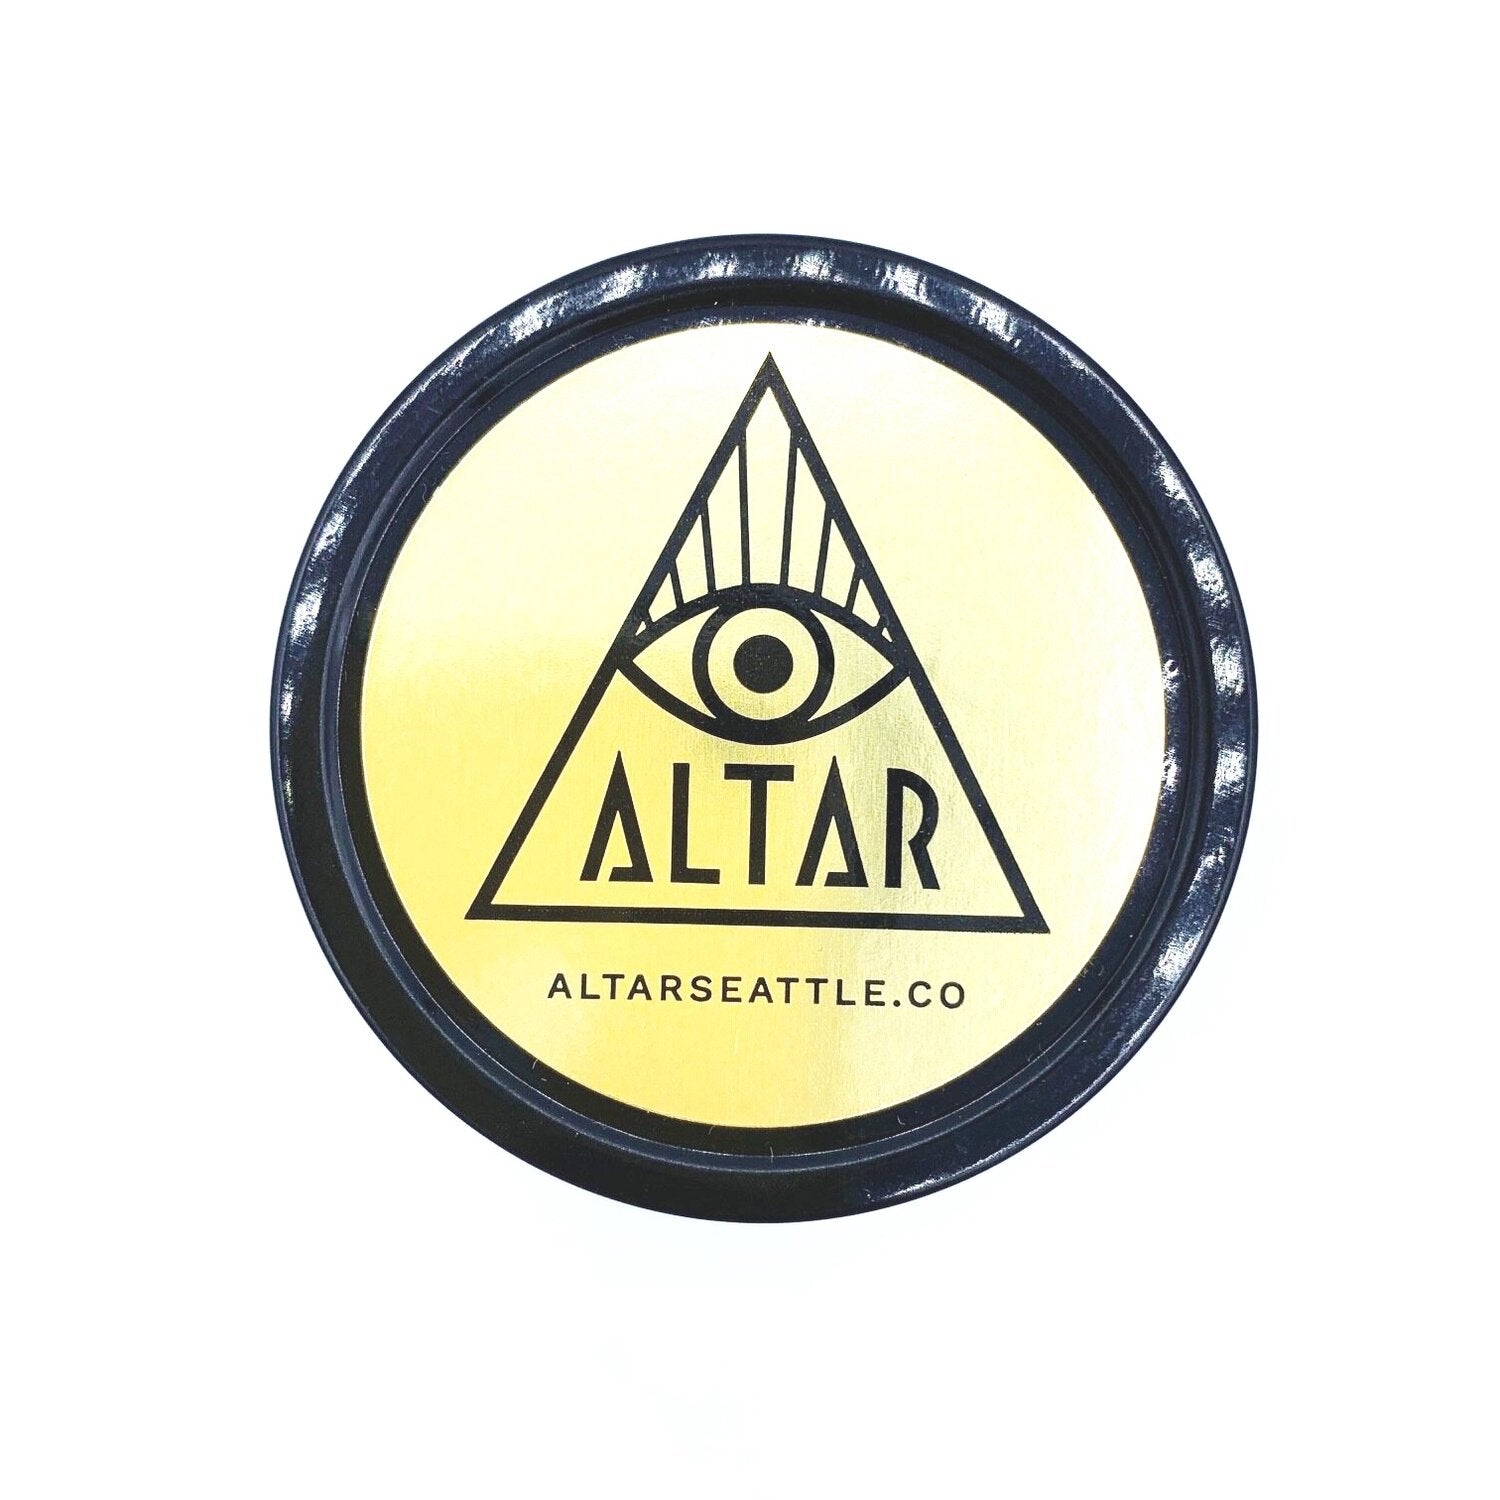 Gold Altar candle